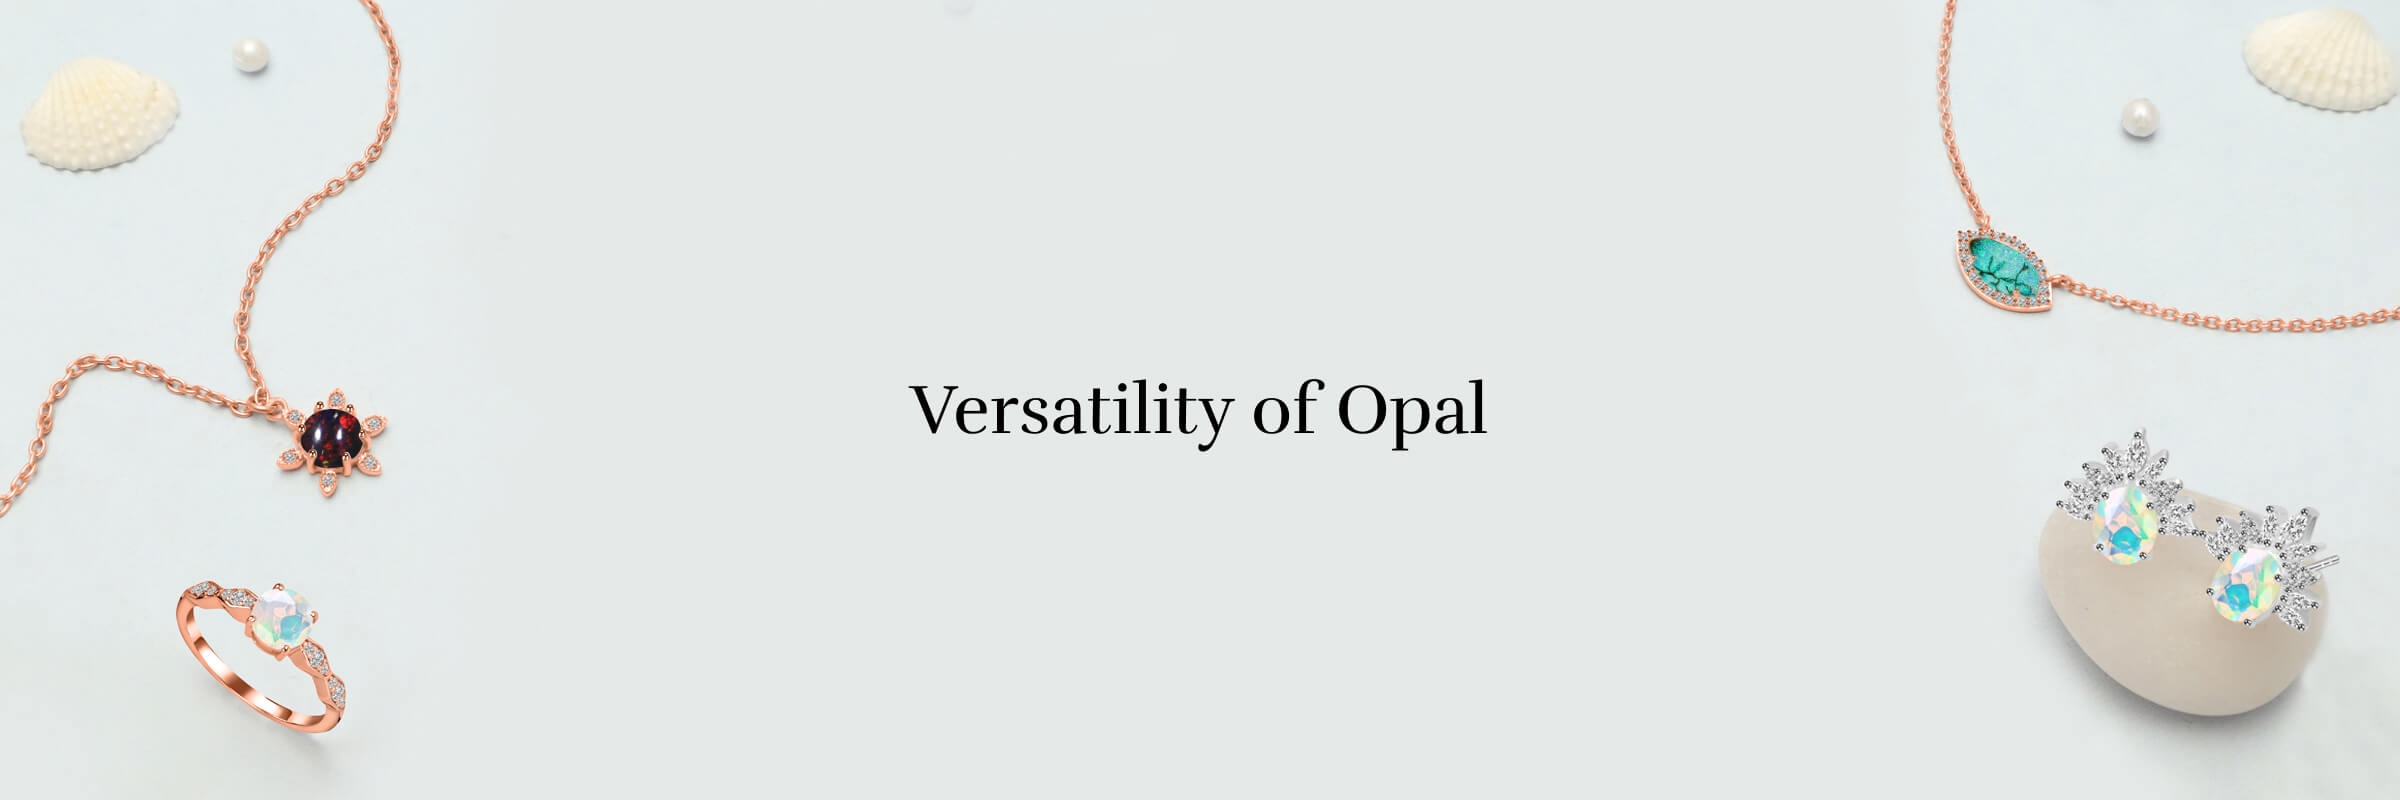 Significance of Opal